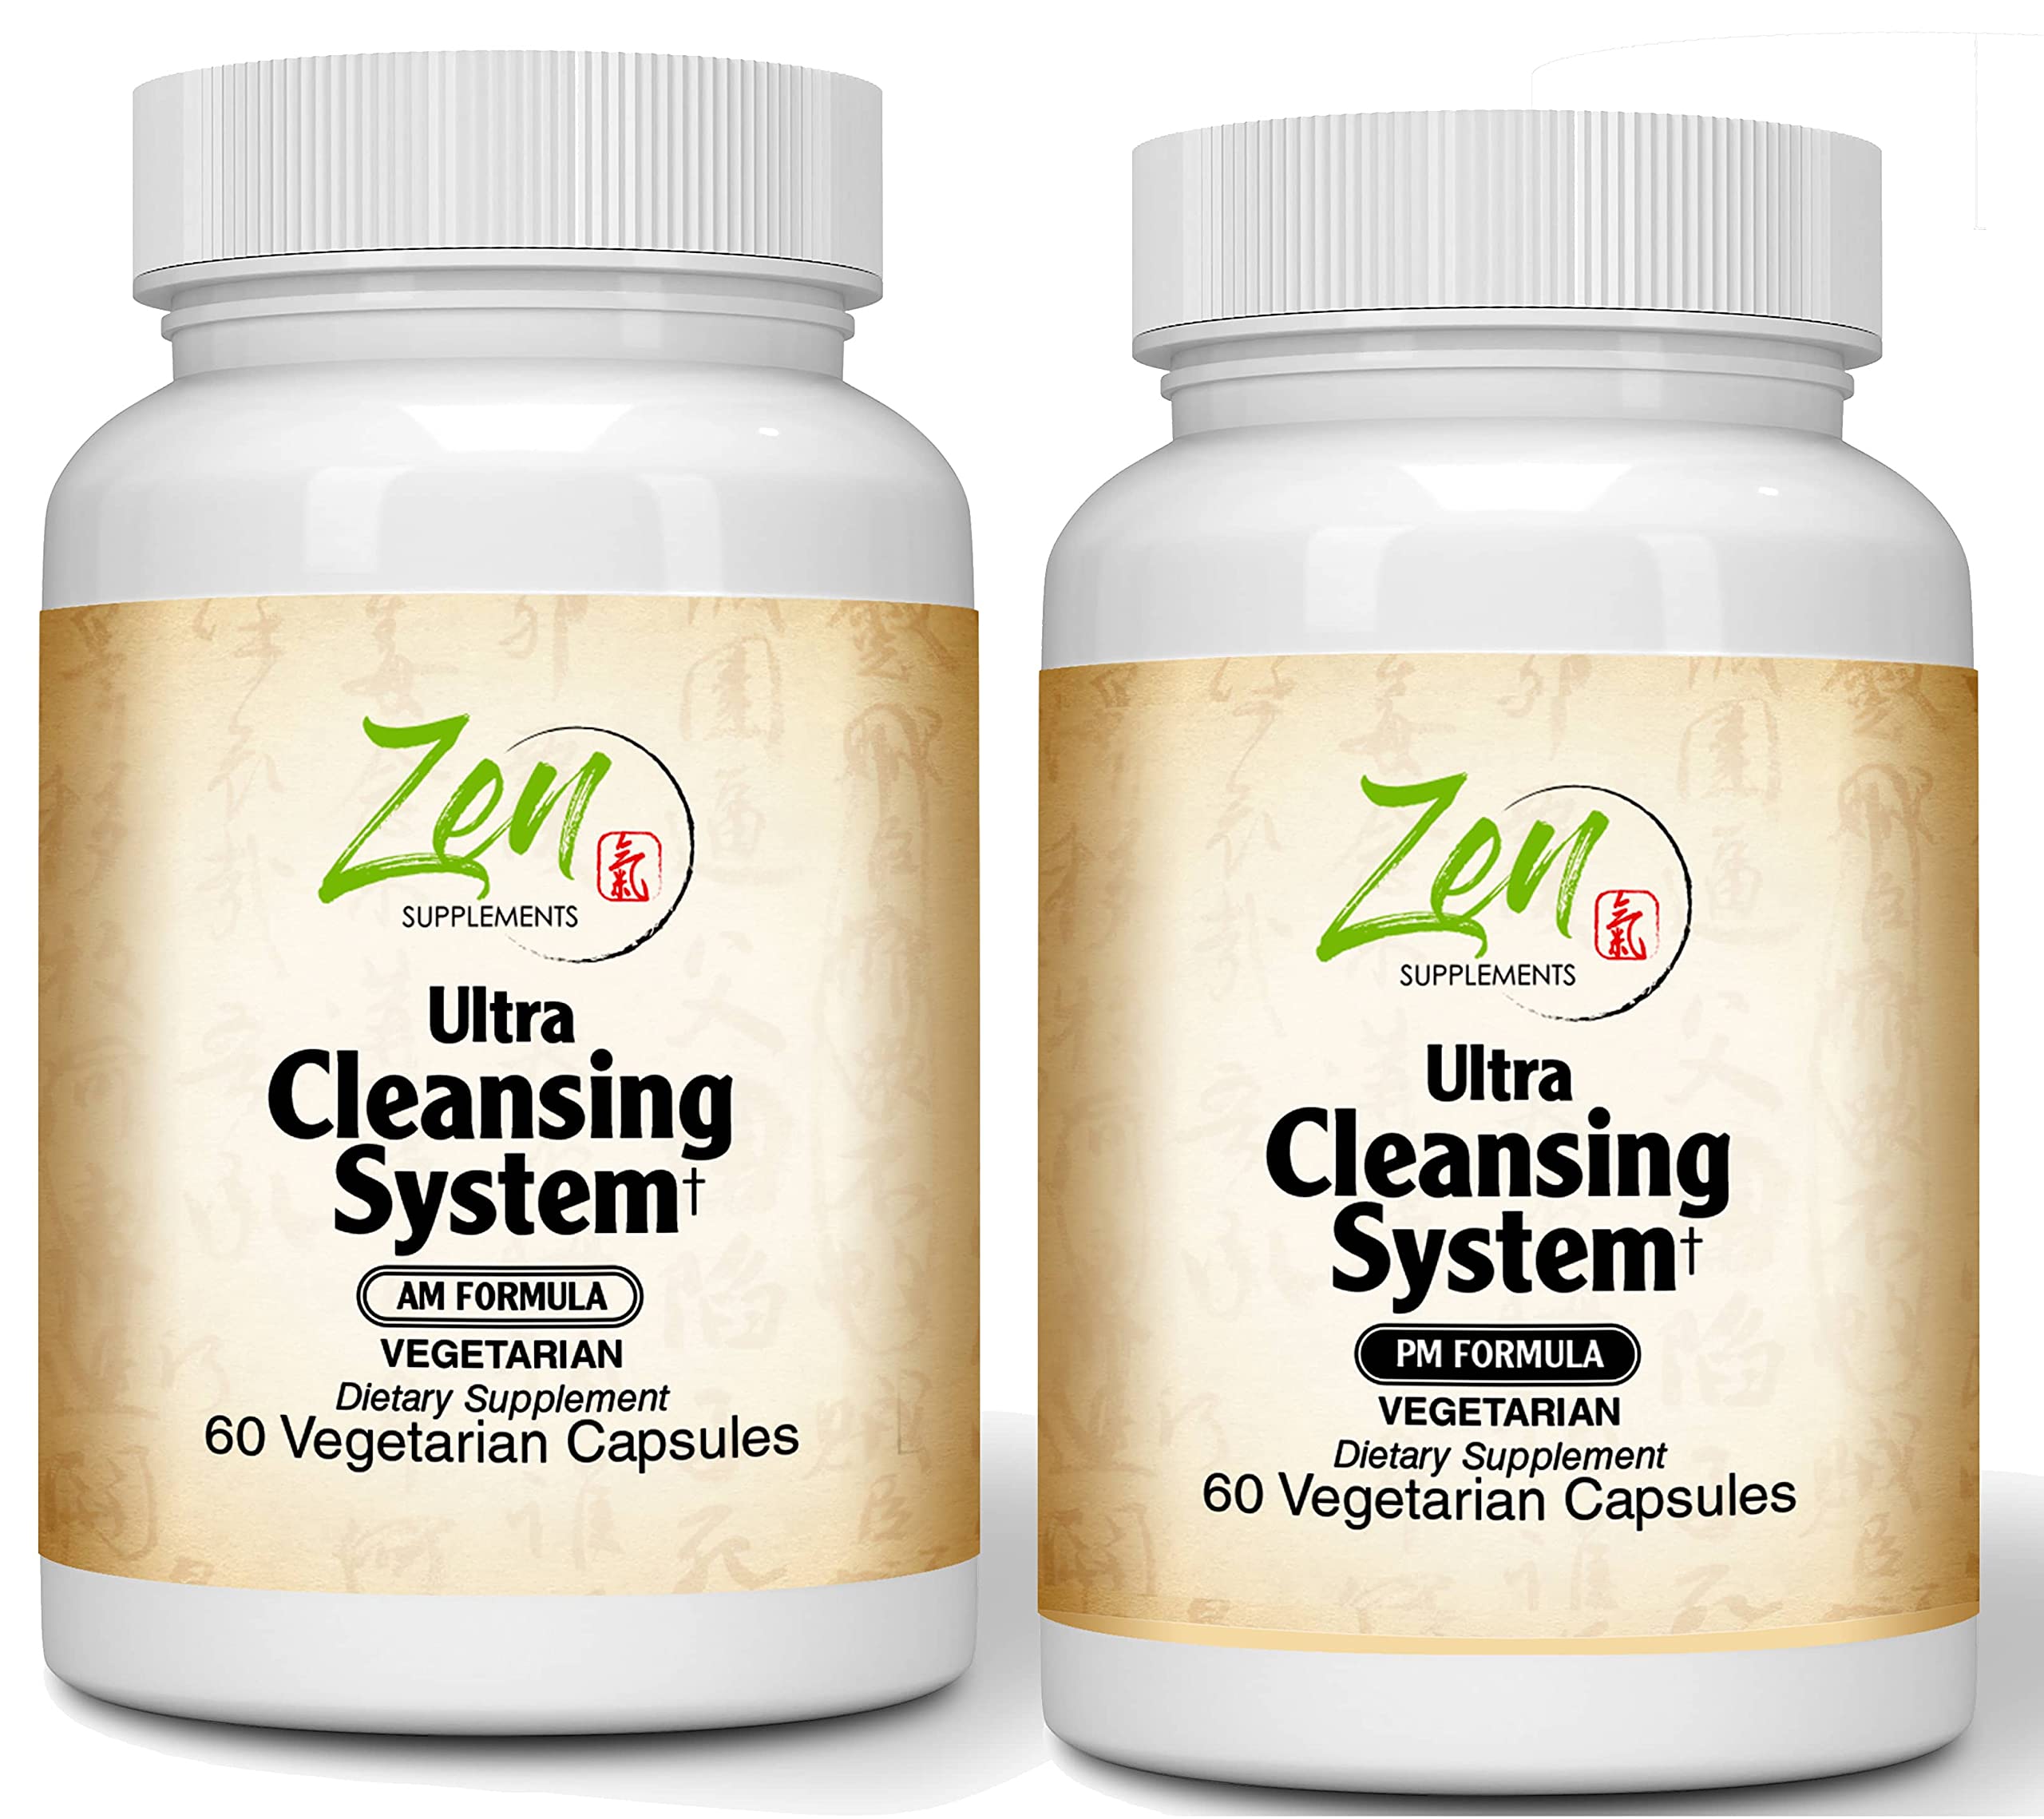 Ultra Cleansing System AM/PM Kit -100% Natural Herbal Blends Support for Maximum Whole Body Organs & Systems Detox Cleanse - Works Safely & Gently both Day & Night Over 30 Days - Vegetarian Formula 30 Day Kit